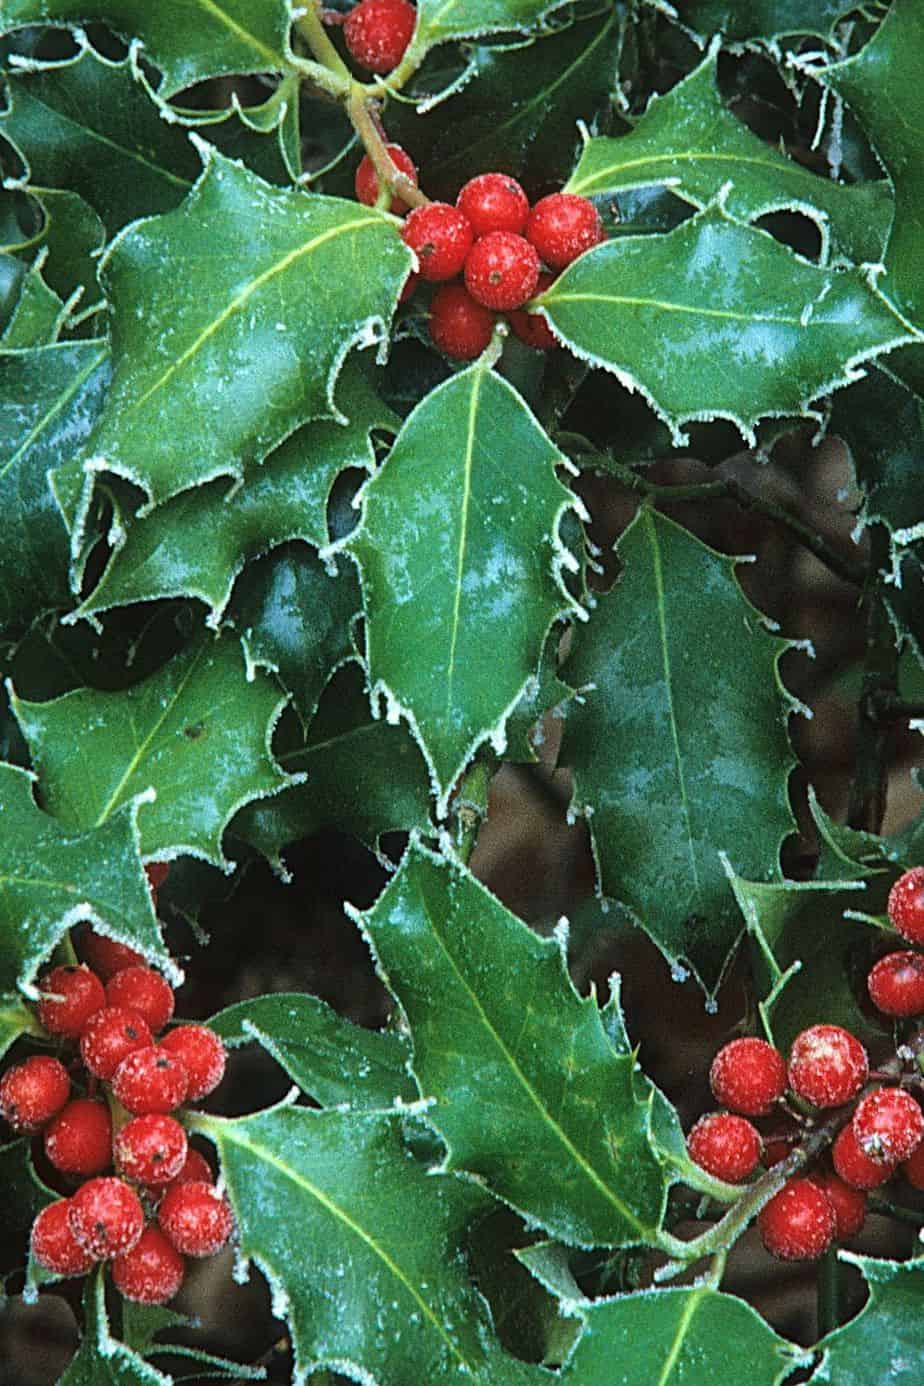 Holly is another stunning addition to your collection of plants you can grow for privacy